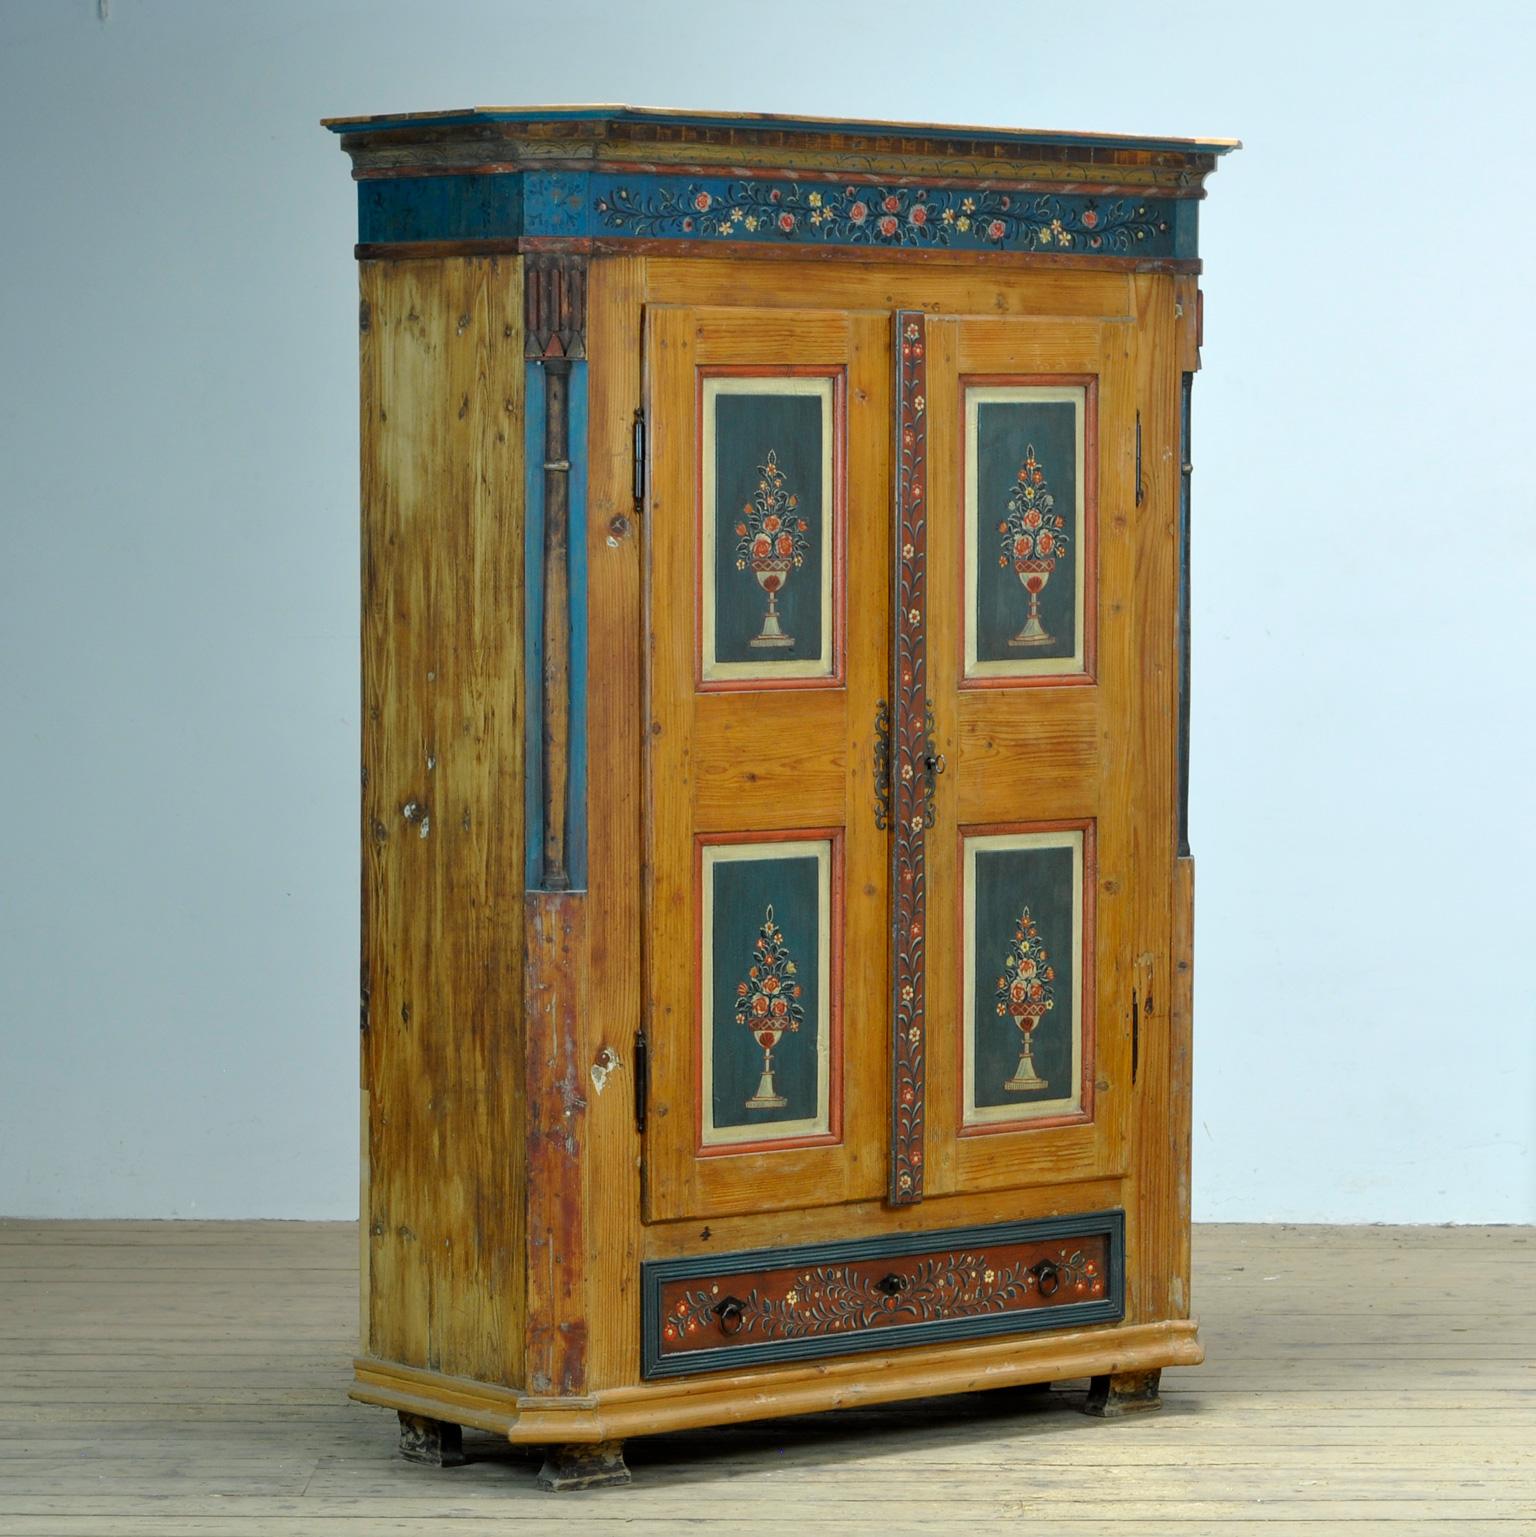 A pine cupboard from rural southern Germany, dating from around 1850. The cupboard was probably given as a wedding gift. This cabinet is made of solid pine and is hand-painted in vibrant colors. On the inside there are 3 shelves on the right and a